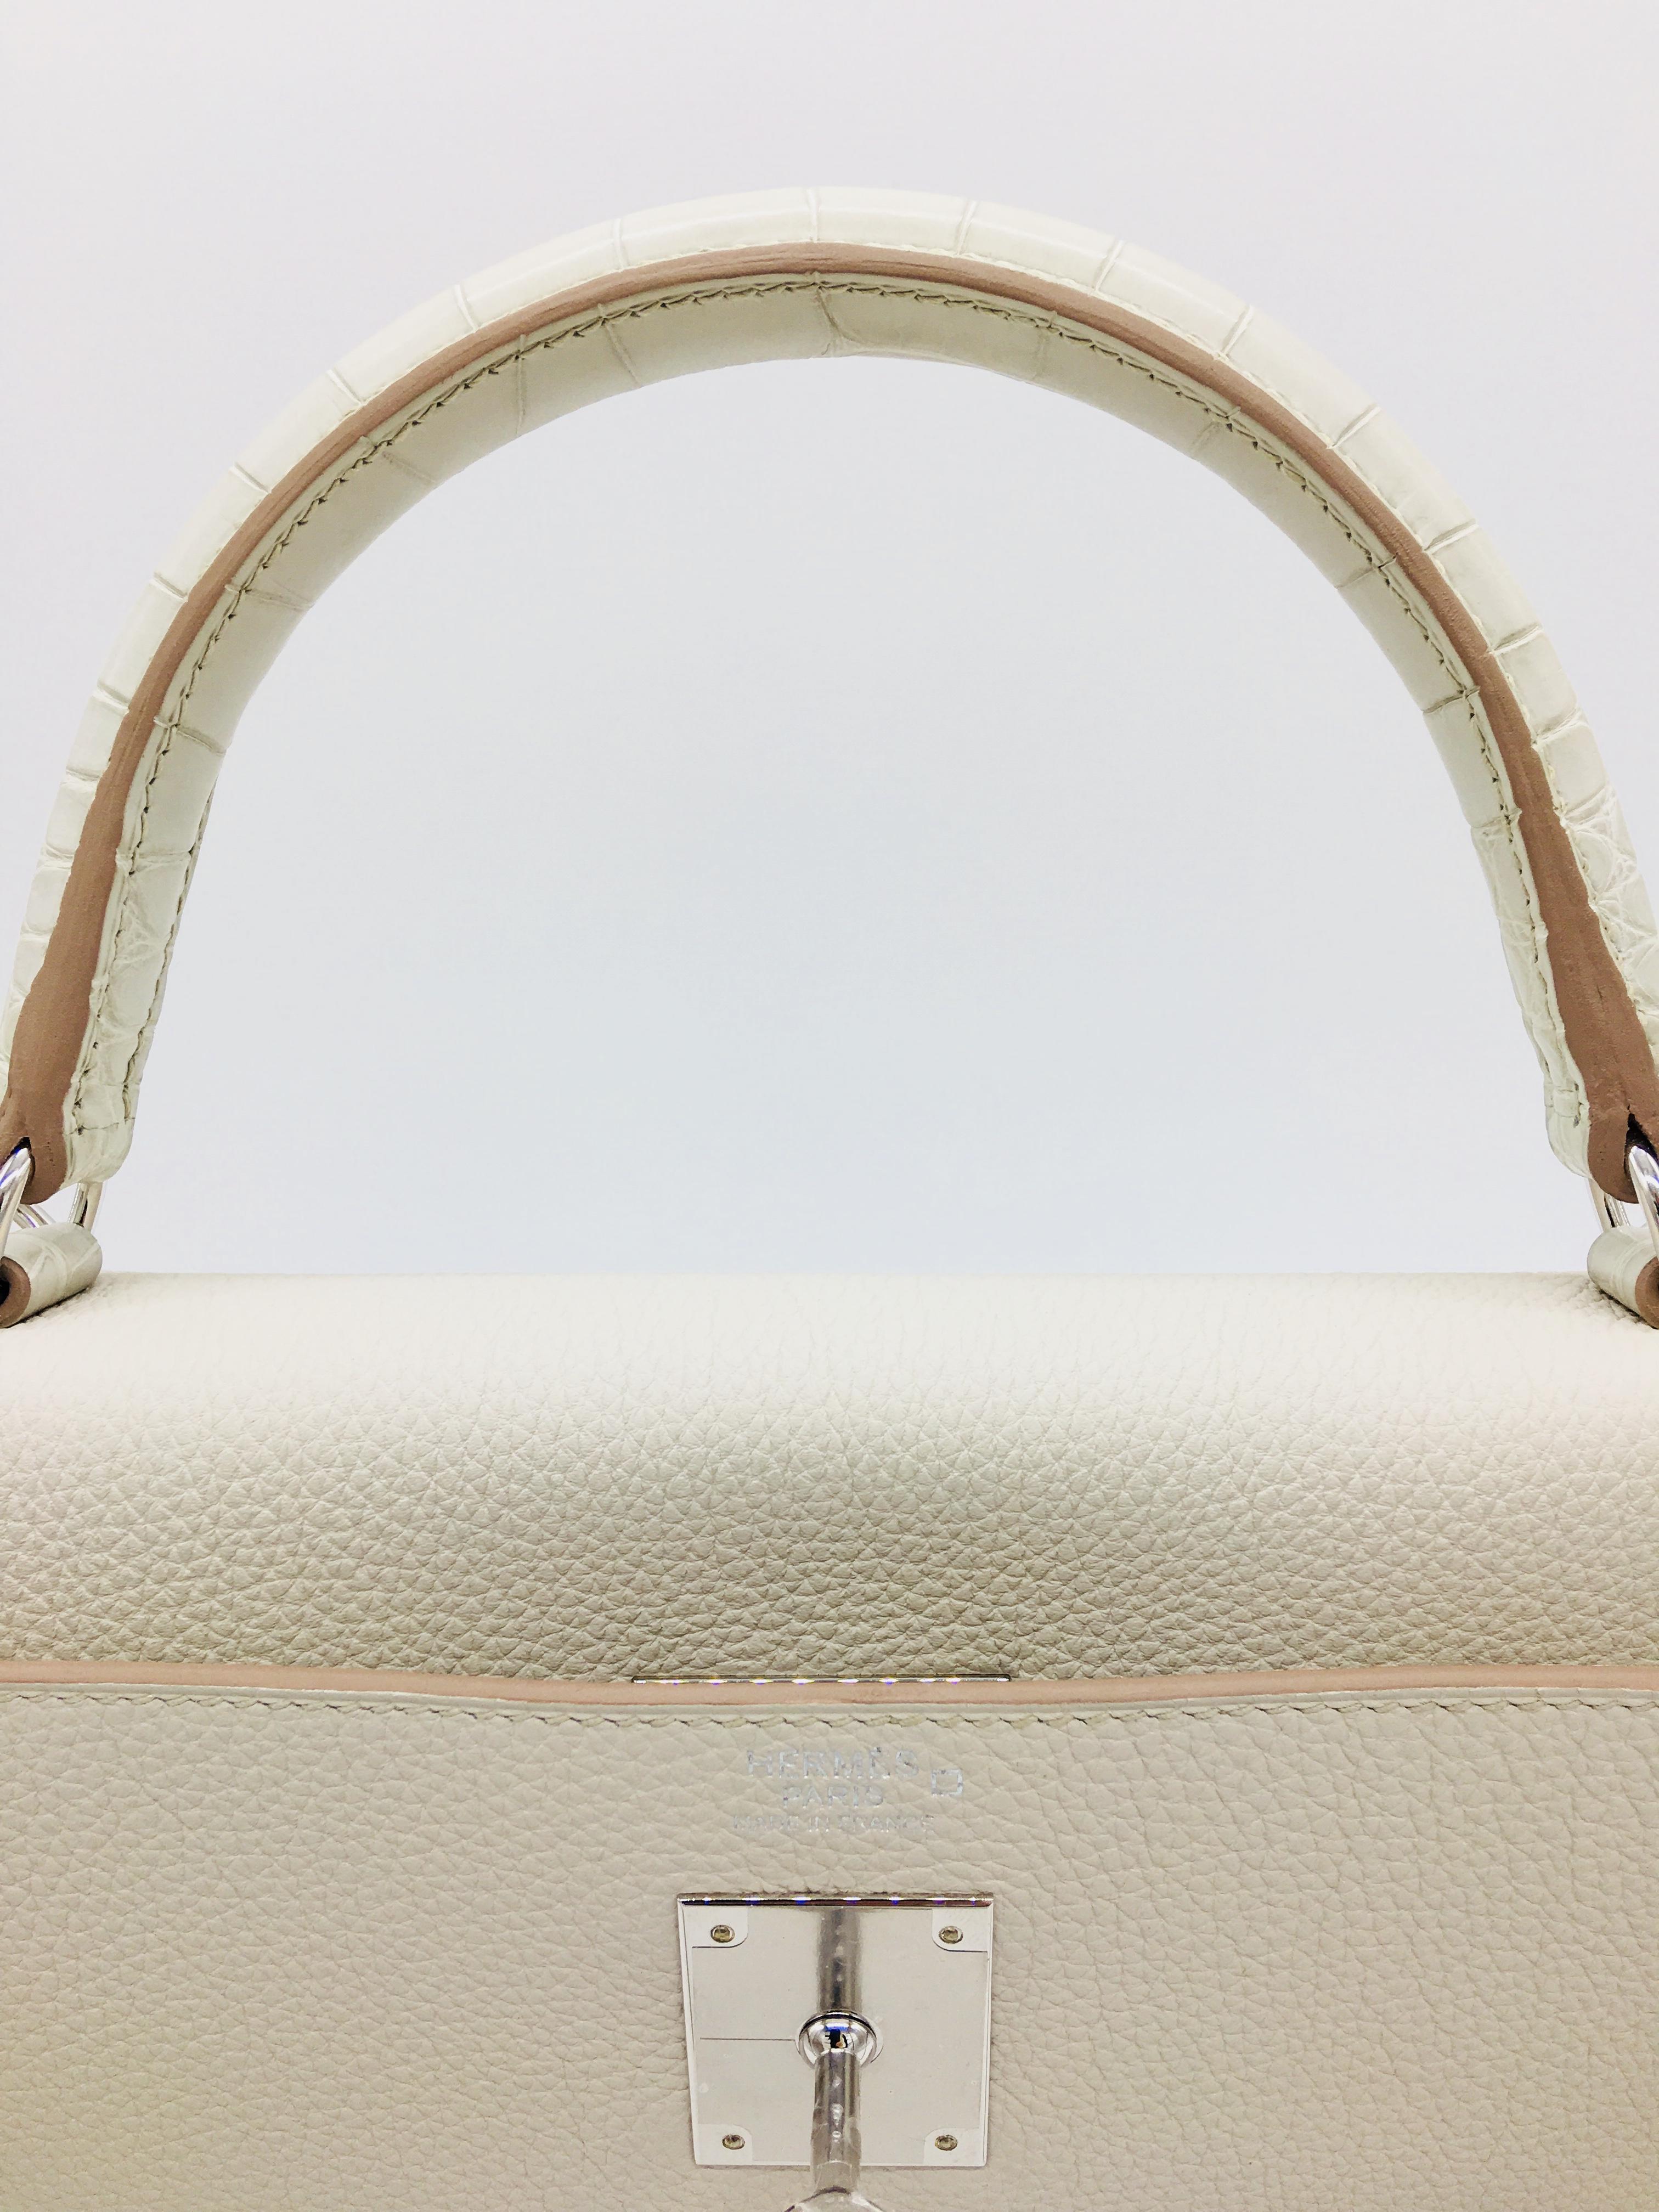 The Kelly Touch is an interesting and different combination from Hermes which was introduced towards the end of 2017.  The body of the bag is in Togo leather whilst the handles are in Crocodile, adding a subtle but distinctive “touch”.  This 32cm